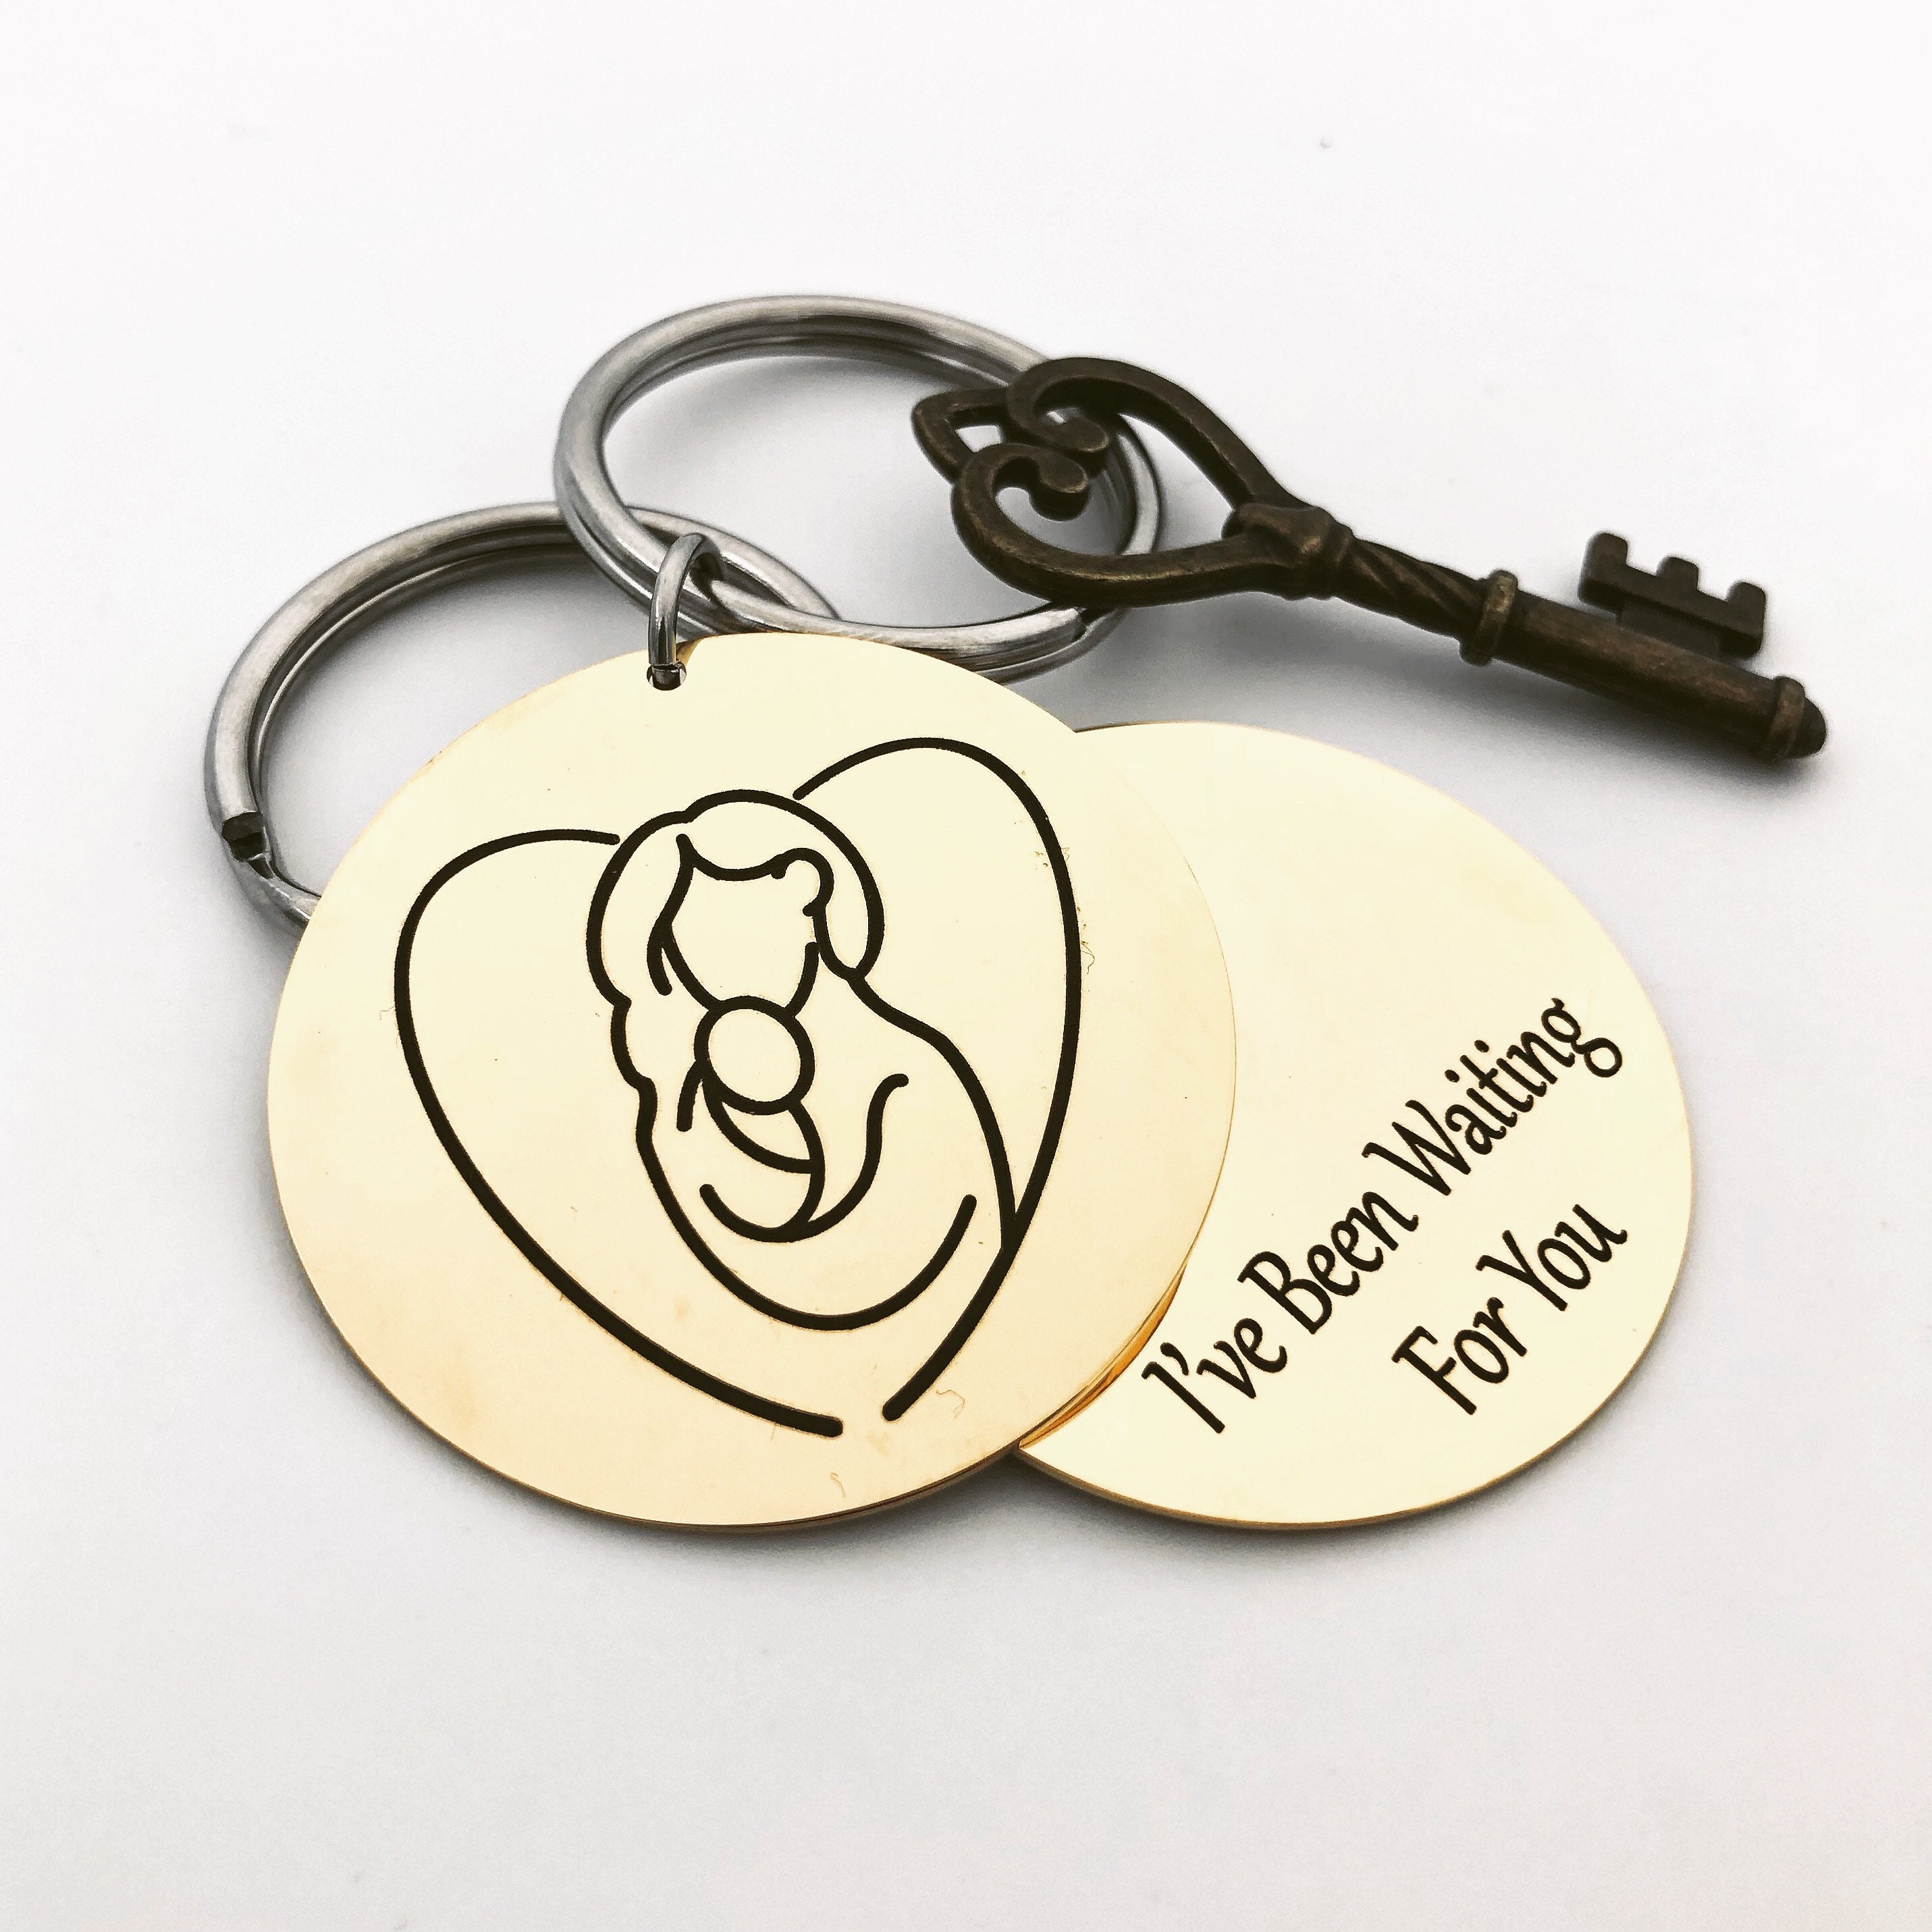 KBB Surrounded by Balls Boy Mom Key Chain - Back Can Be Personalized